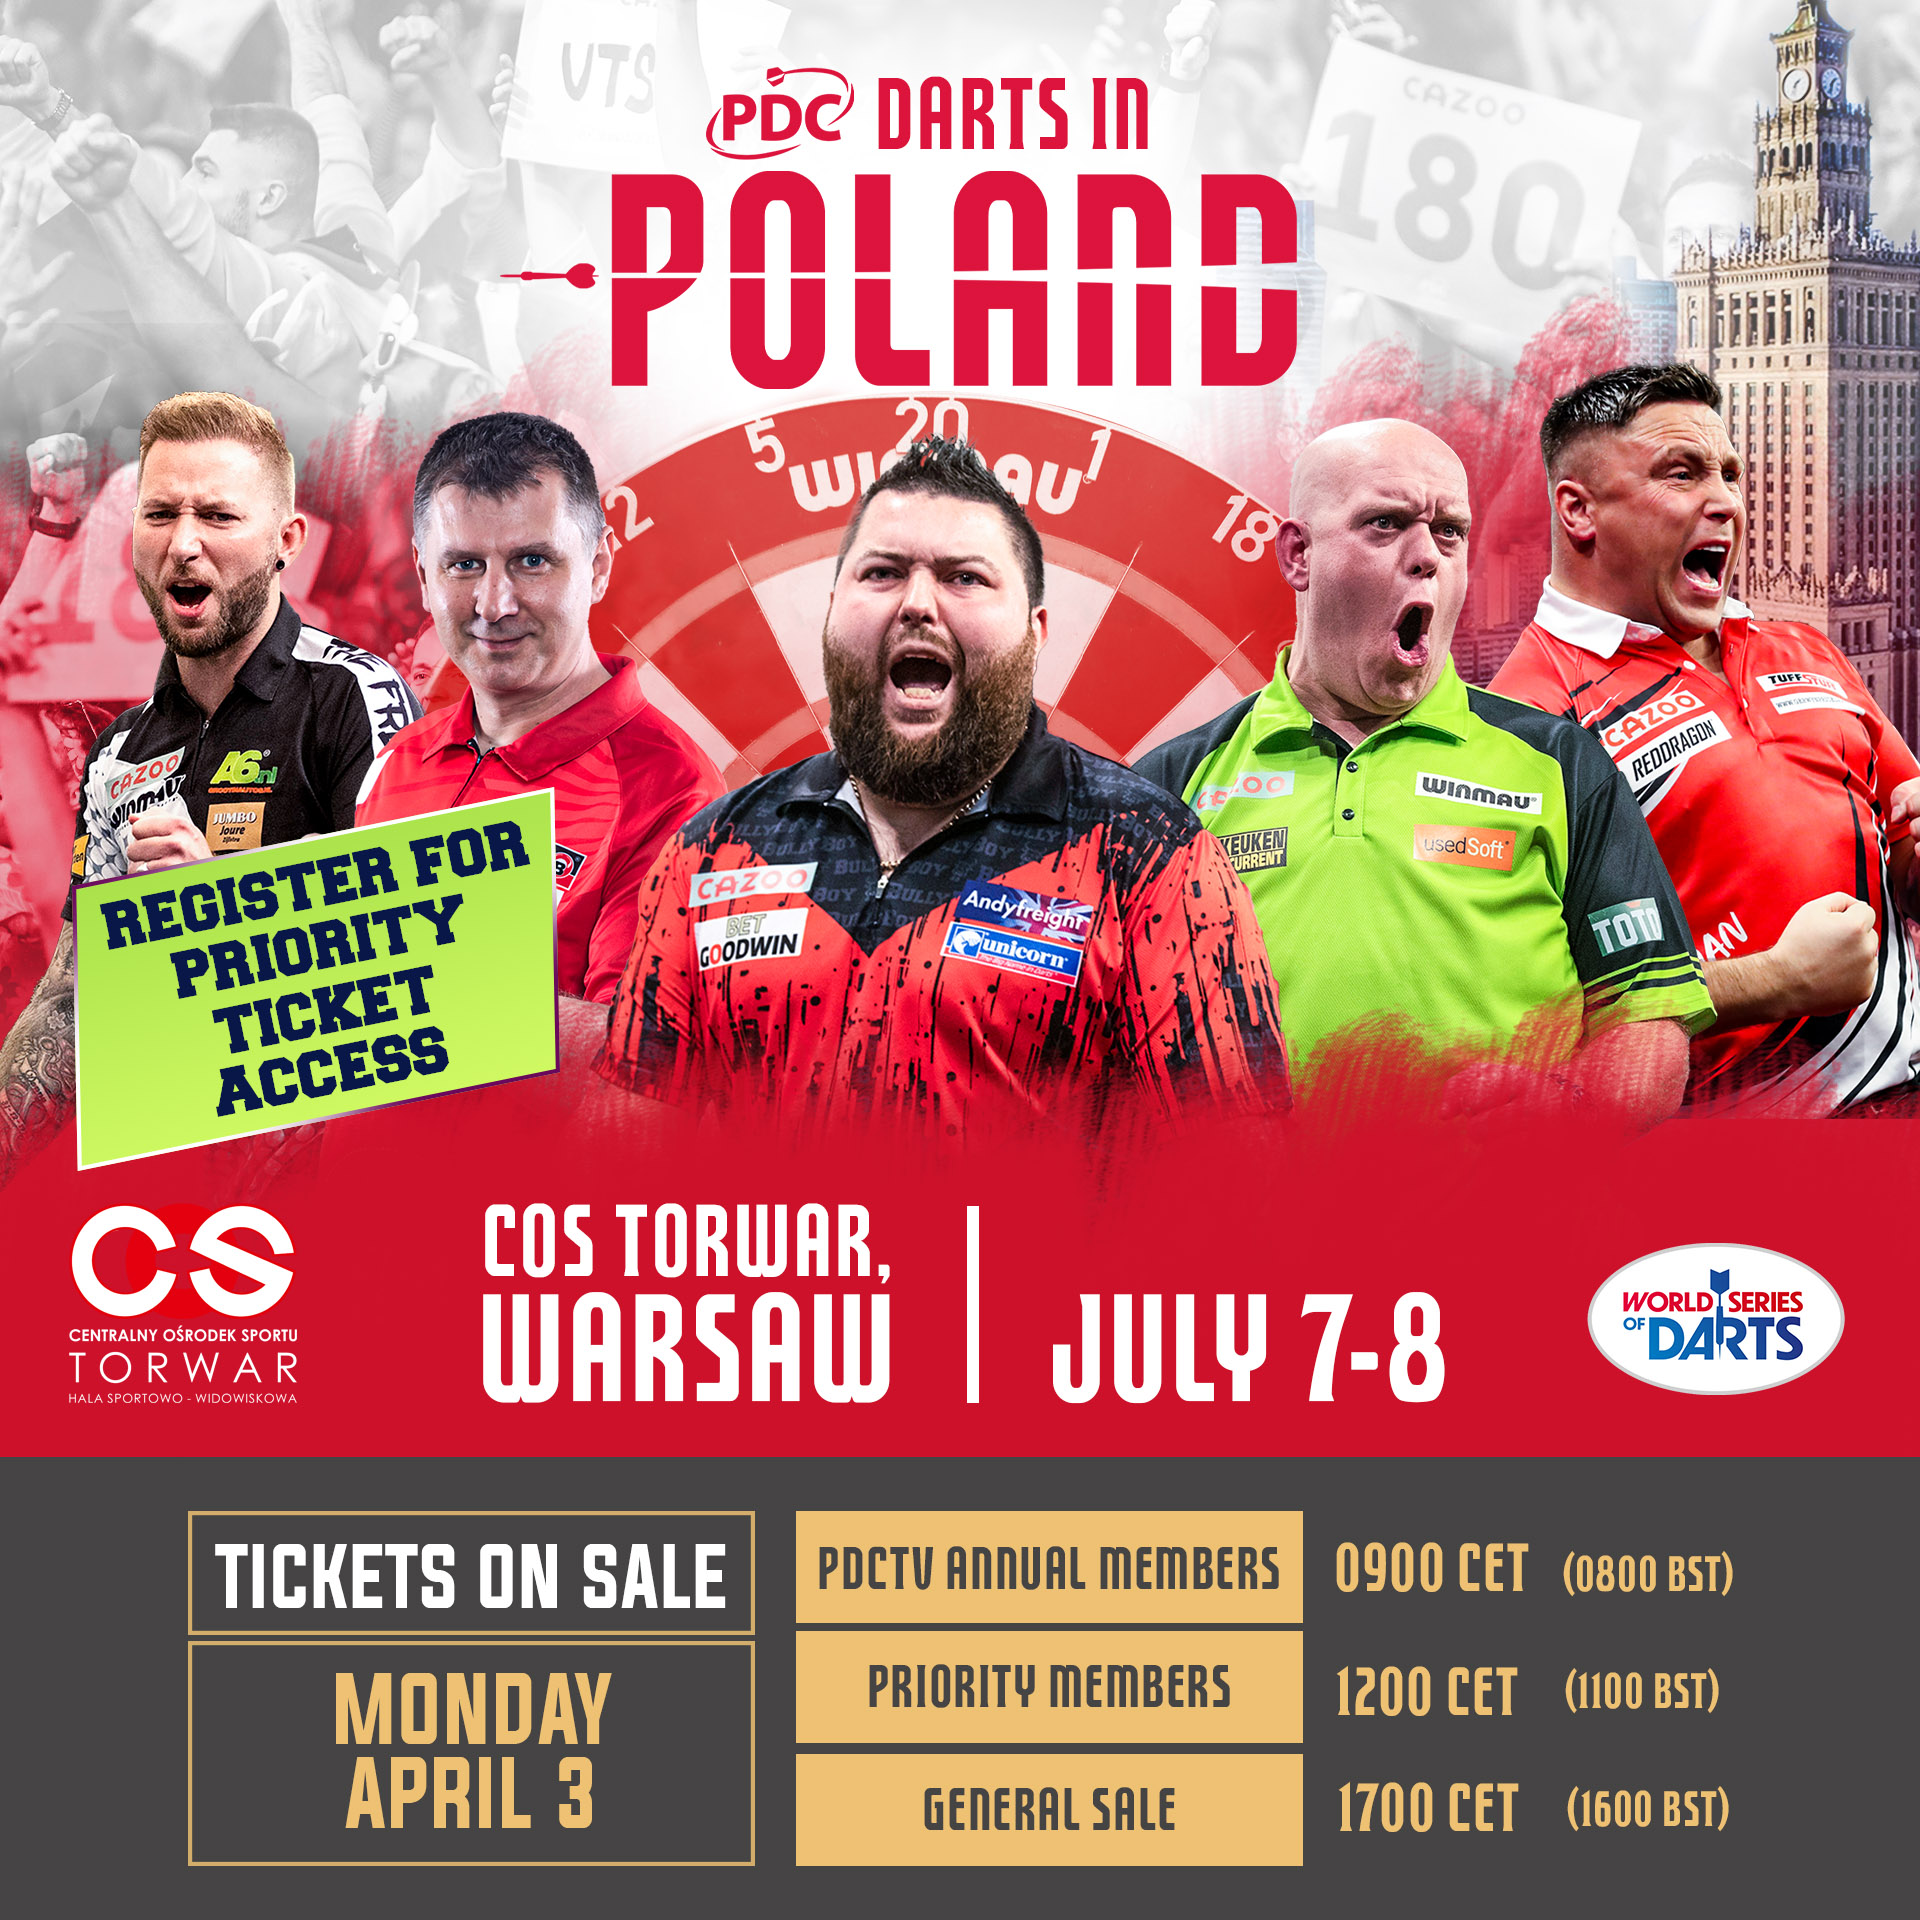 Poland Darts Masters tickets on sale dates